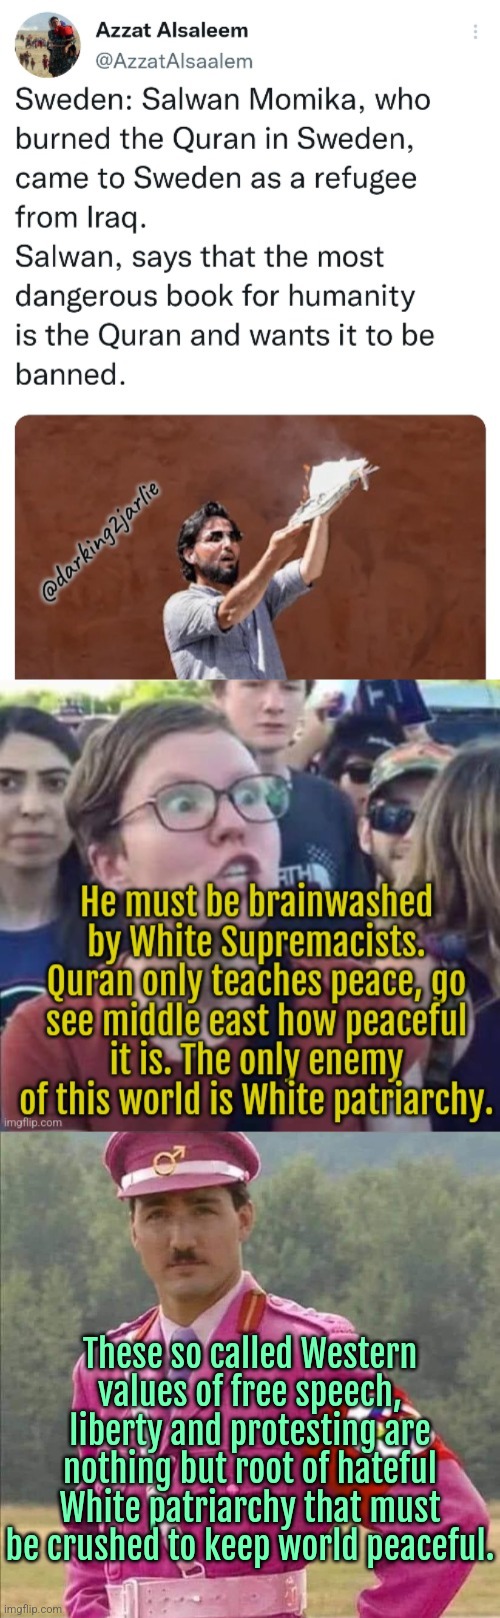 Brown White Supremacists ! | These so called Western values of free speech, liberty and protesting are nothing but root of hateful White patriarchy that must be crushed to keep world peaceful. | image tagged in islamophobia,sweden,europe,liberal logic,religion of peace,white supremacy | made w/ Imgflip meme maker